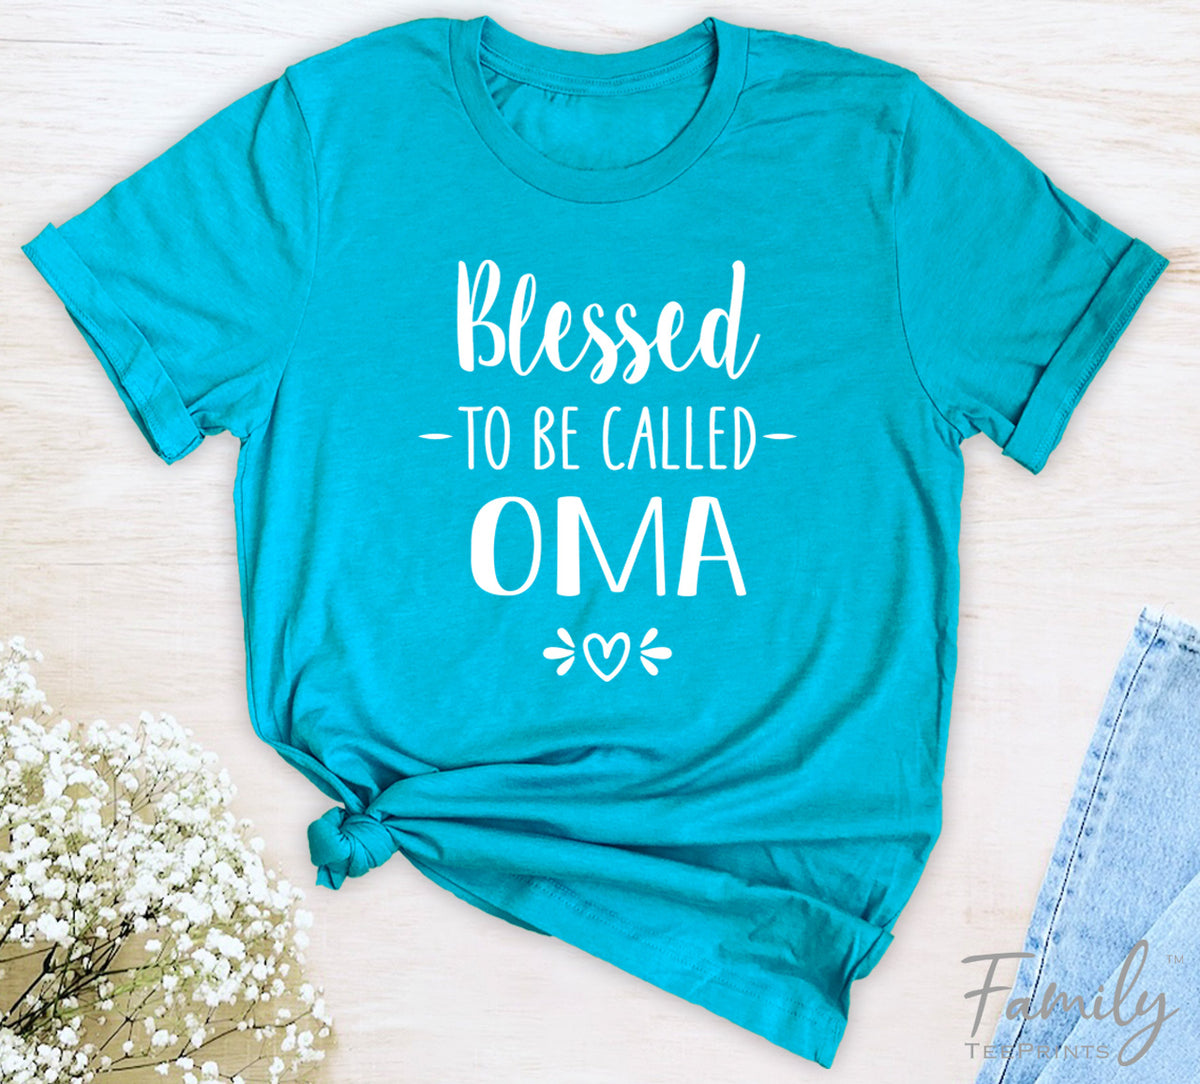 Blessed To Be Called Oma - Unisex T-shirt - Oma Shirt - Gift For New Oma - familyteeprints